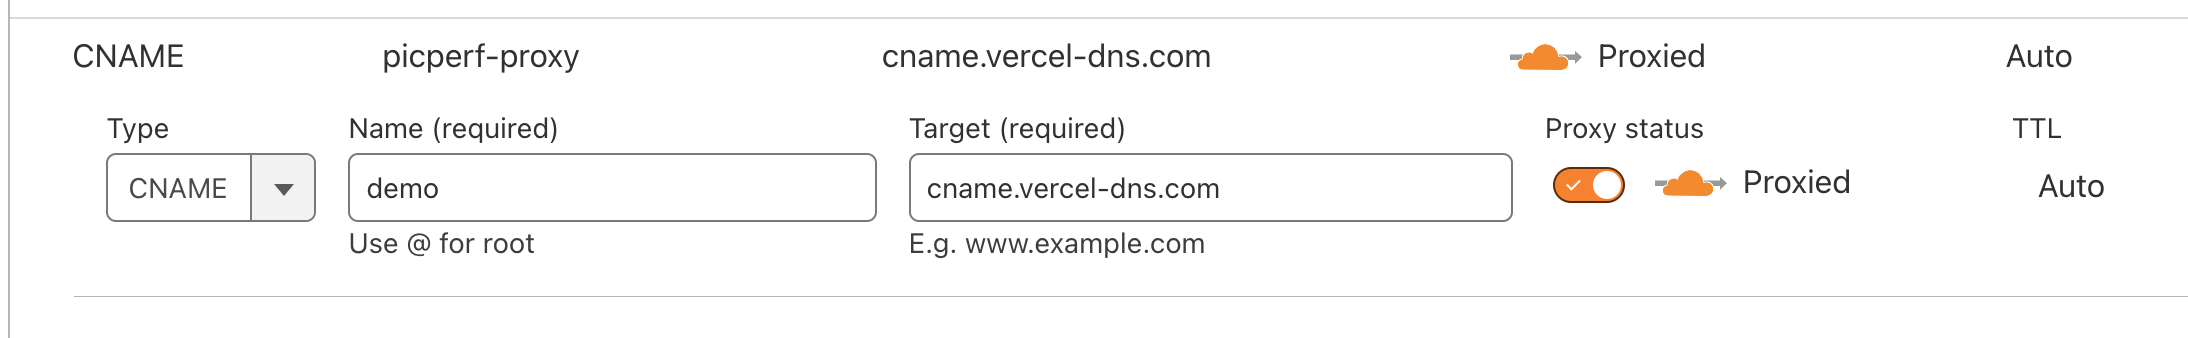 demo DNS record with "proxied" enabled